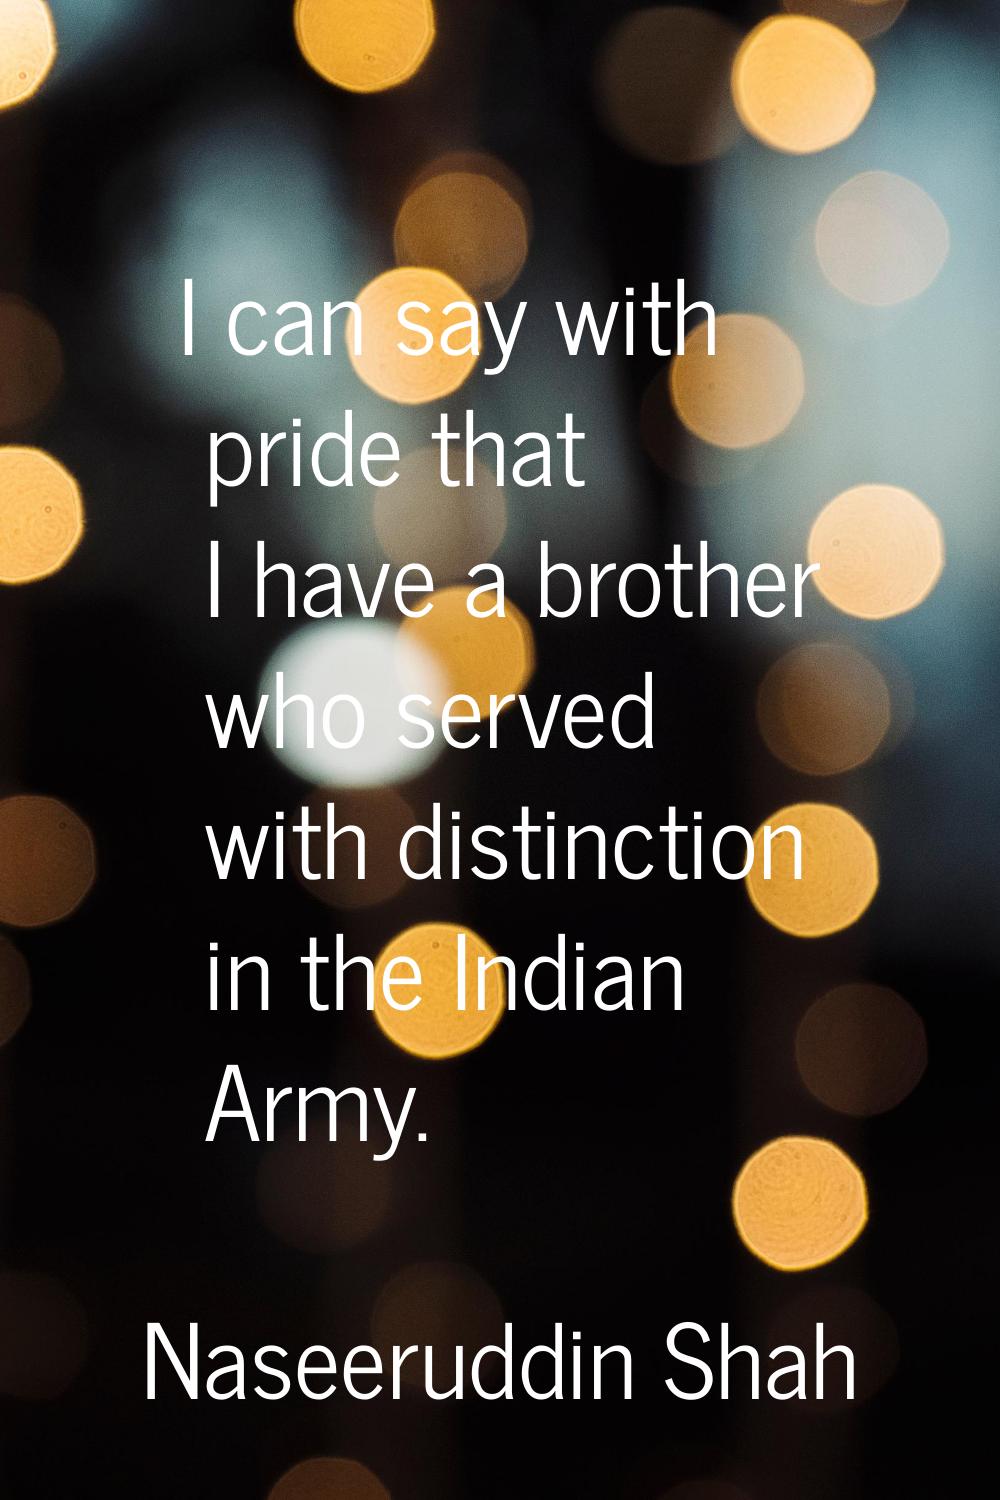 I can say with pride that I have a brother who served with distinction in the Indian Army.